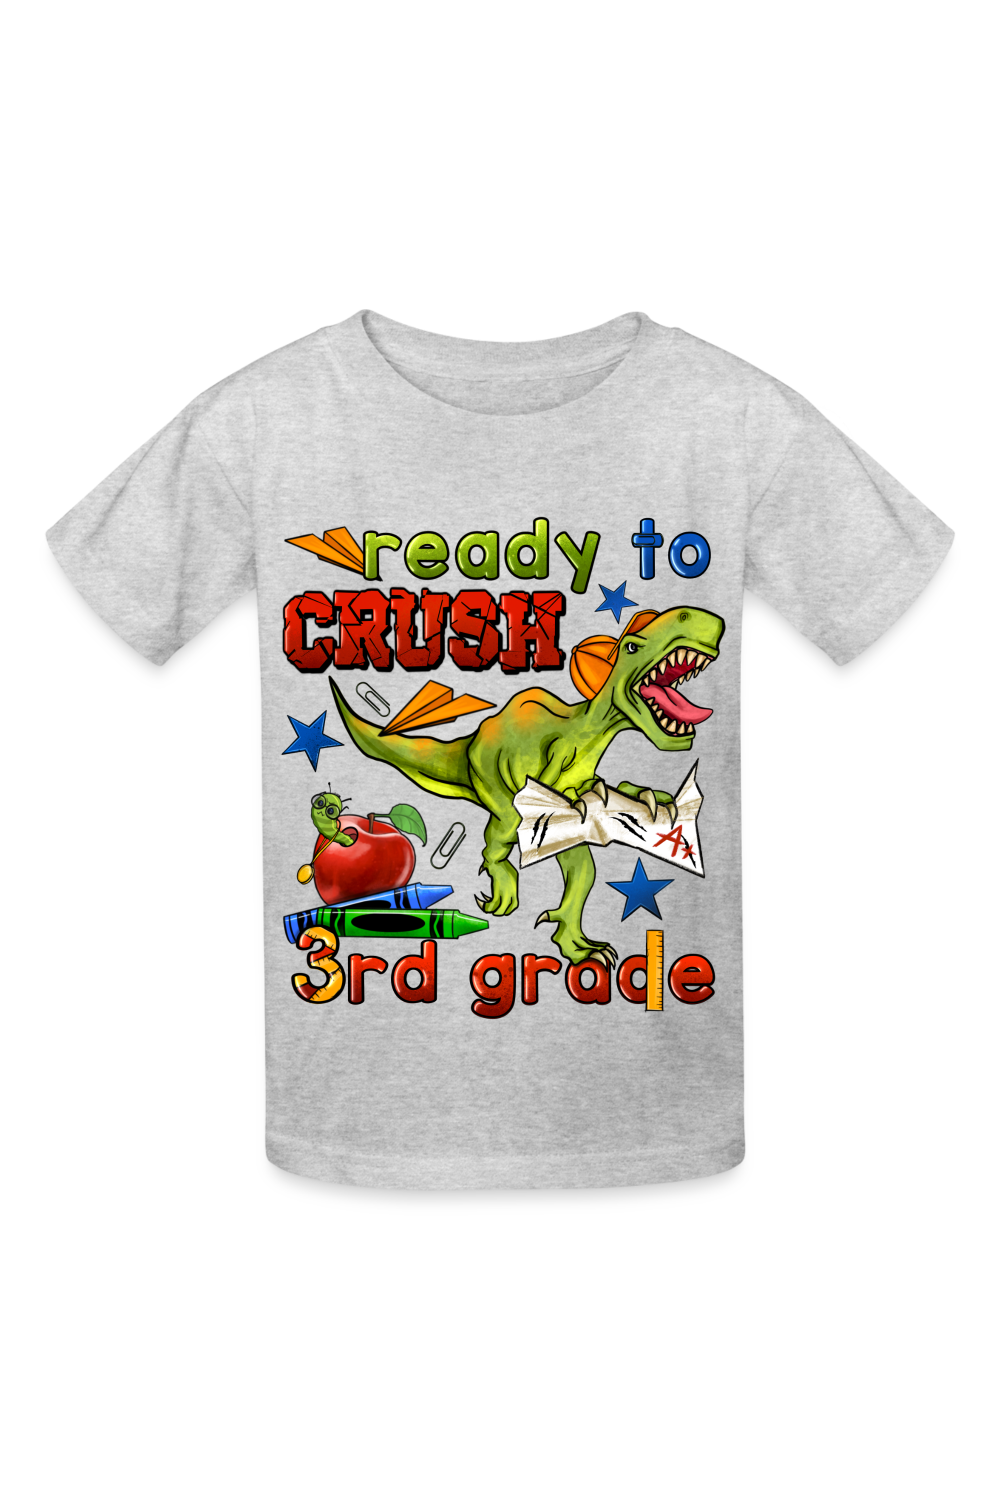 Boys Ready To Crush Third Grade Short Sleeve Tee Shirts for Back To School - heather gray - NicholesGifts.online